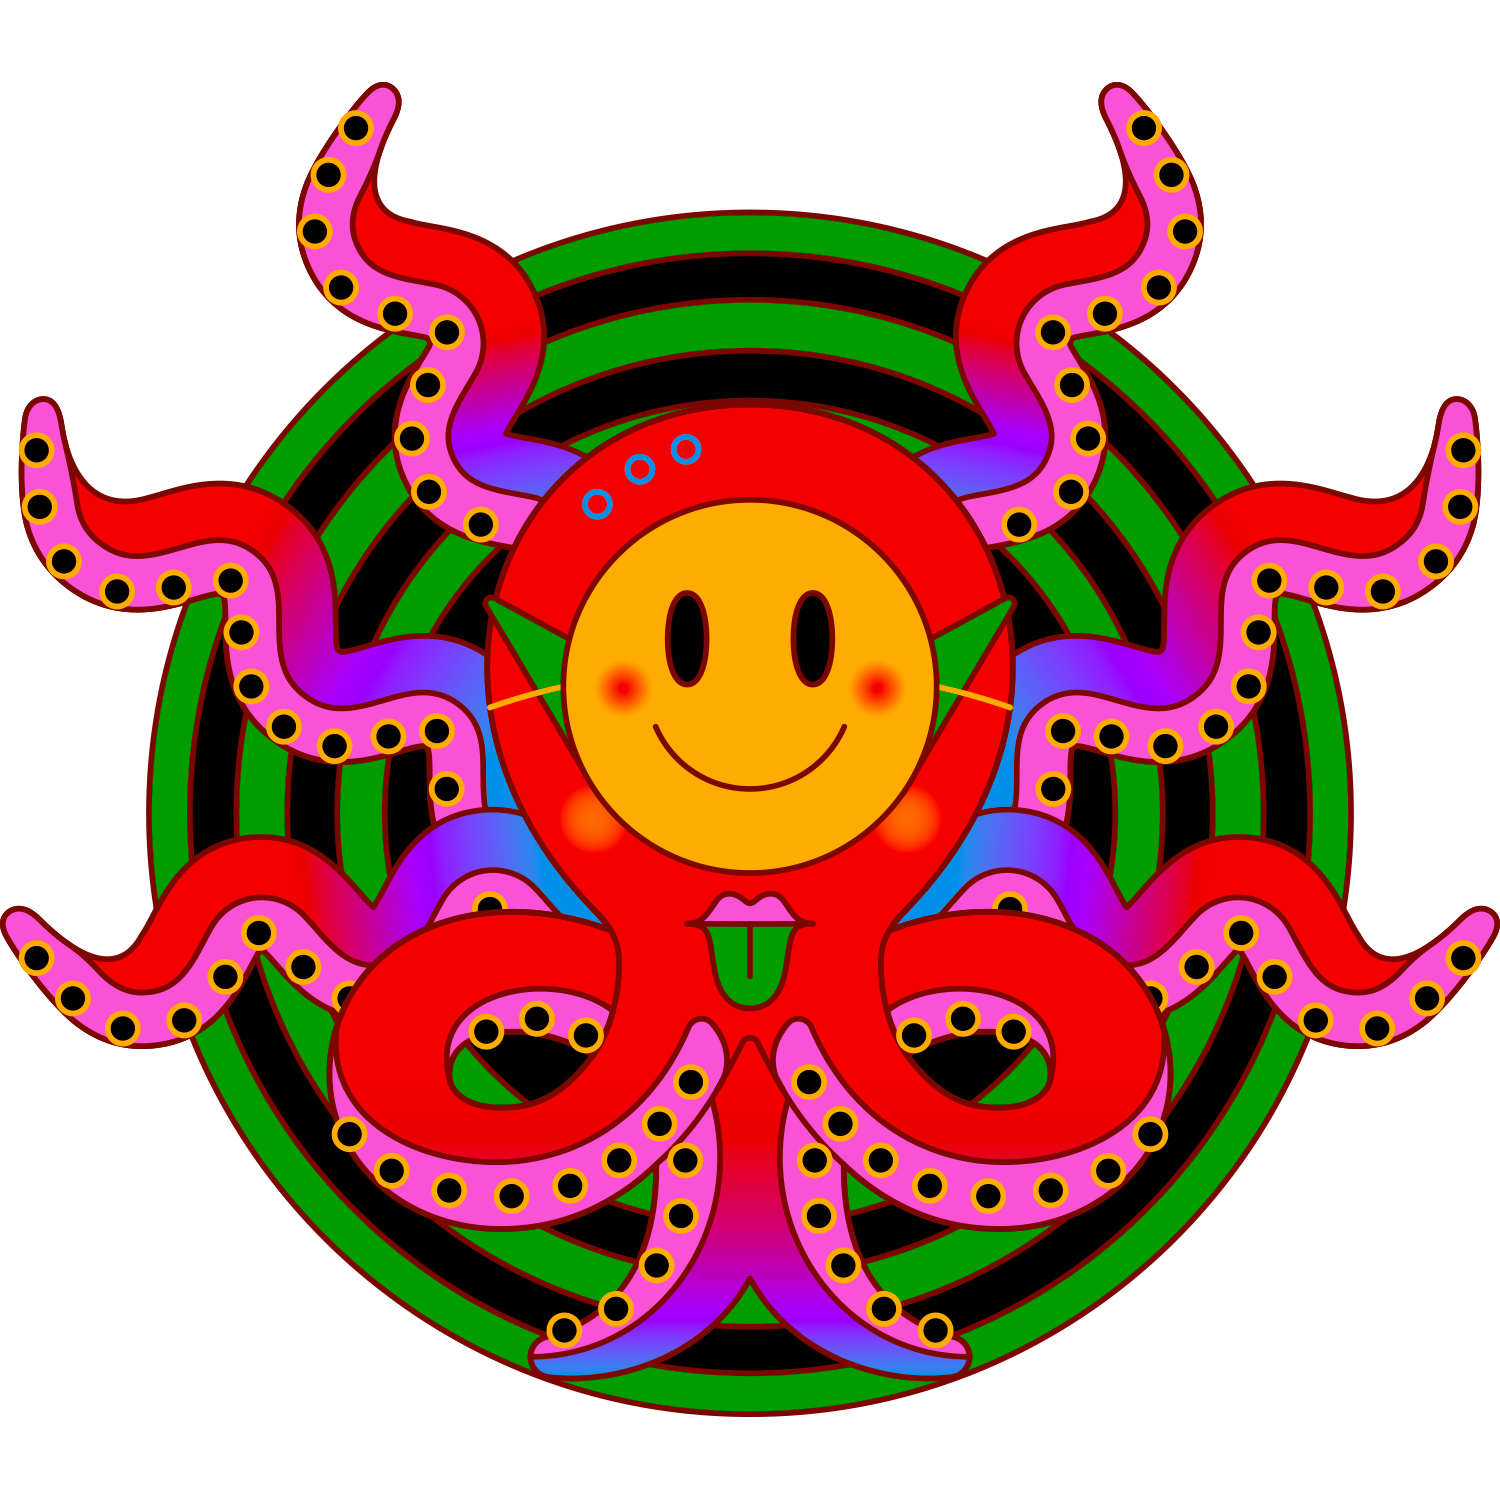 octopus wearing a smiley face mask